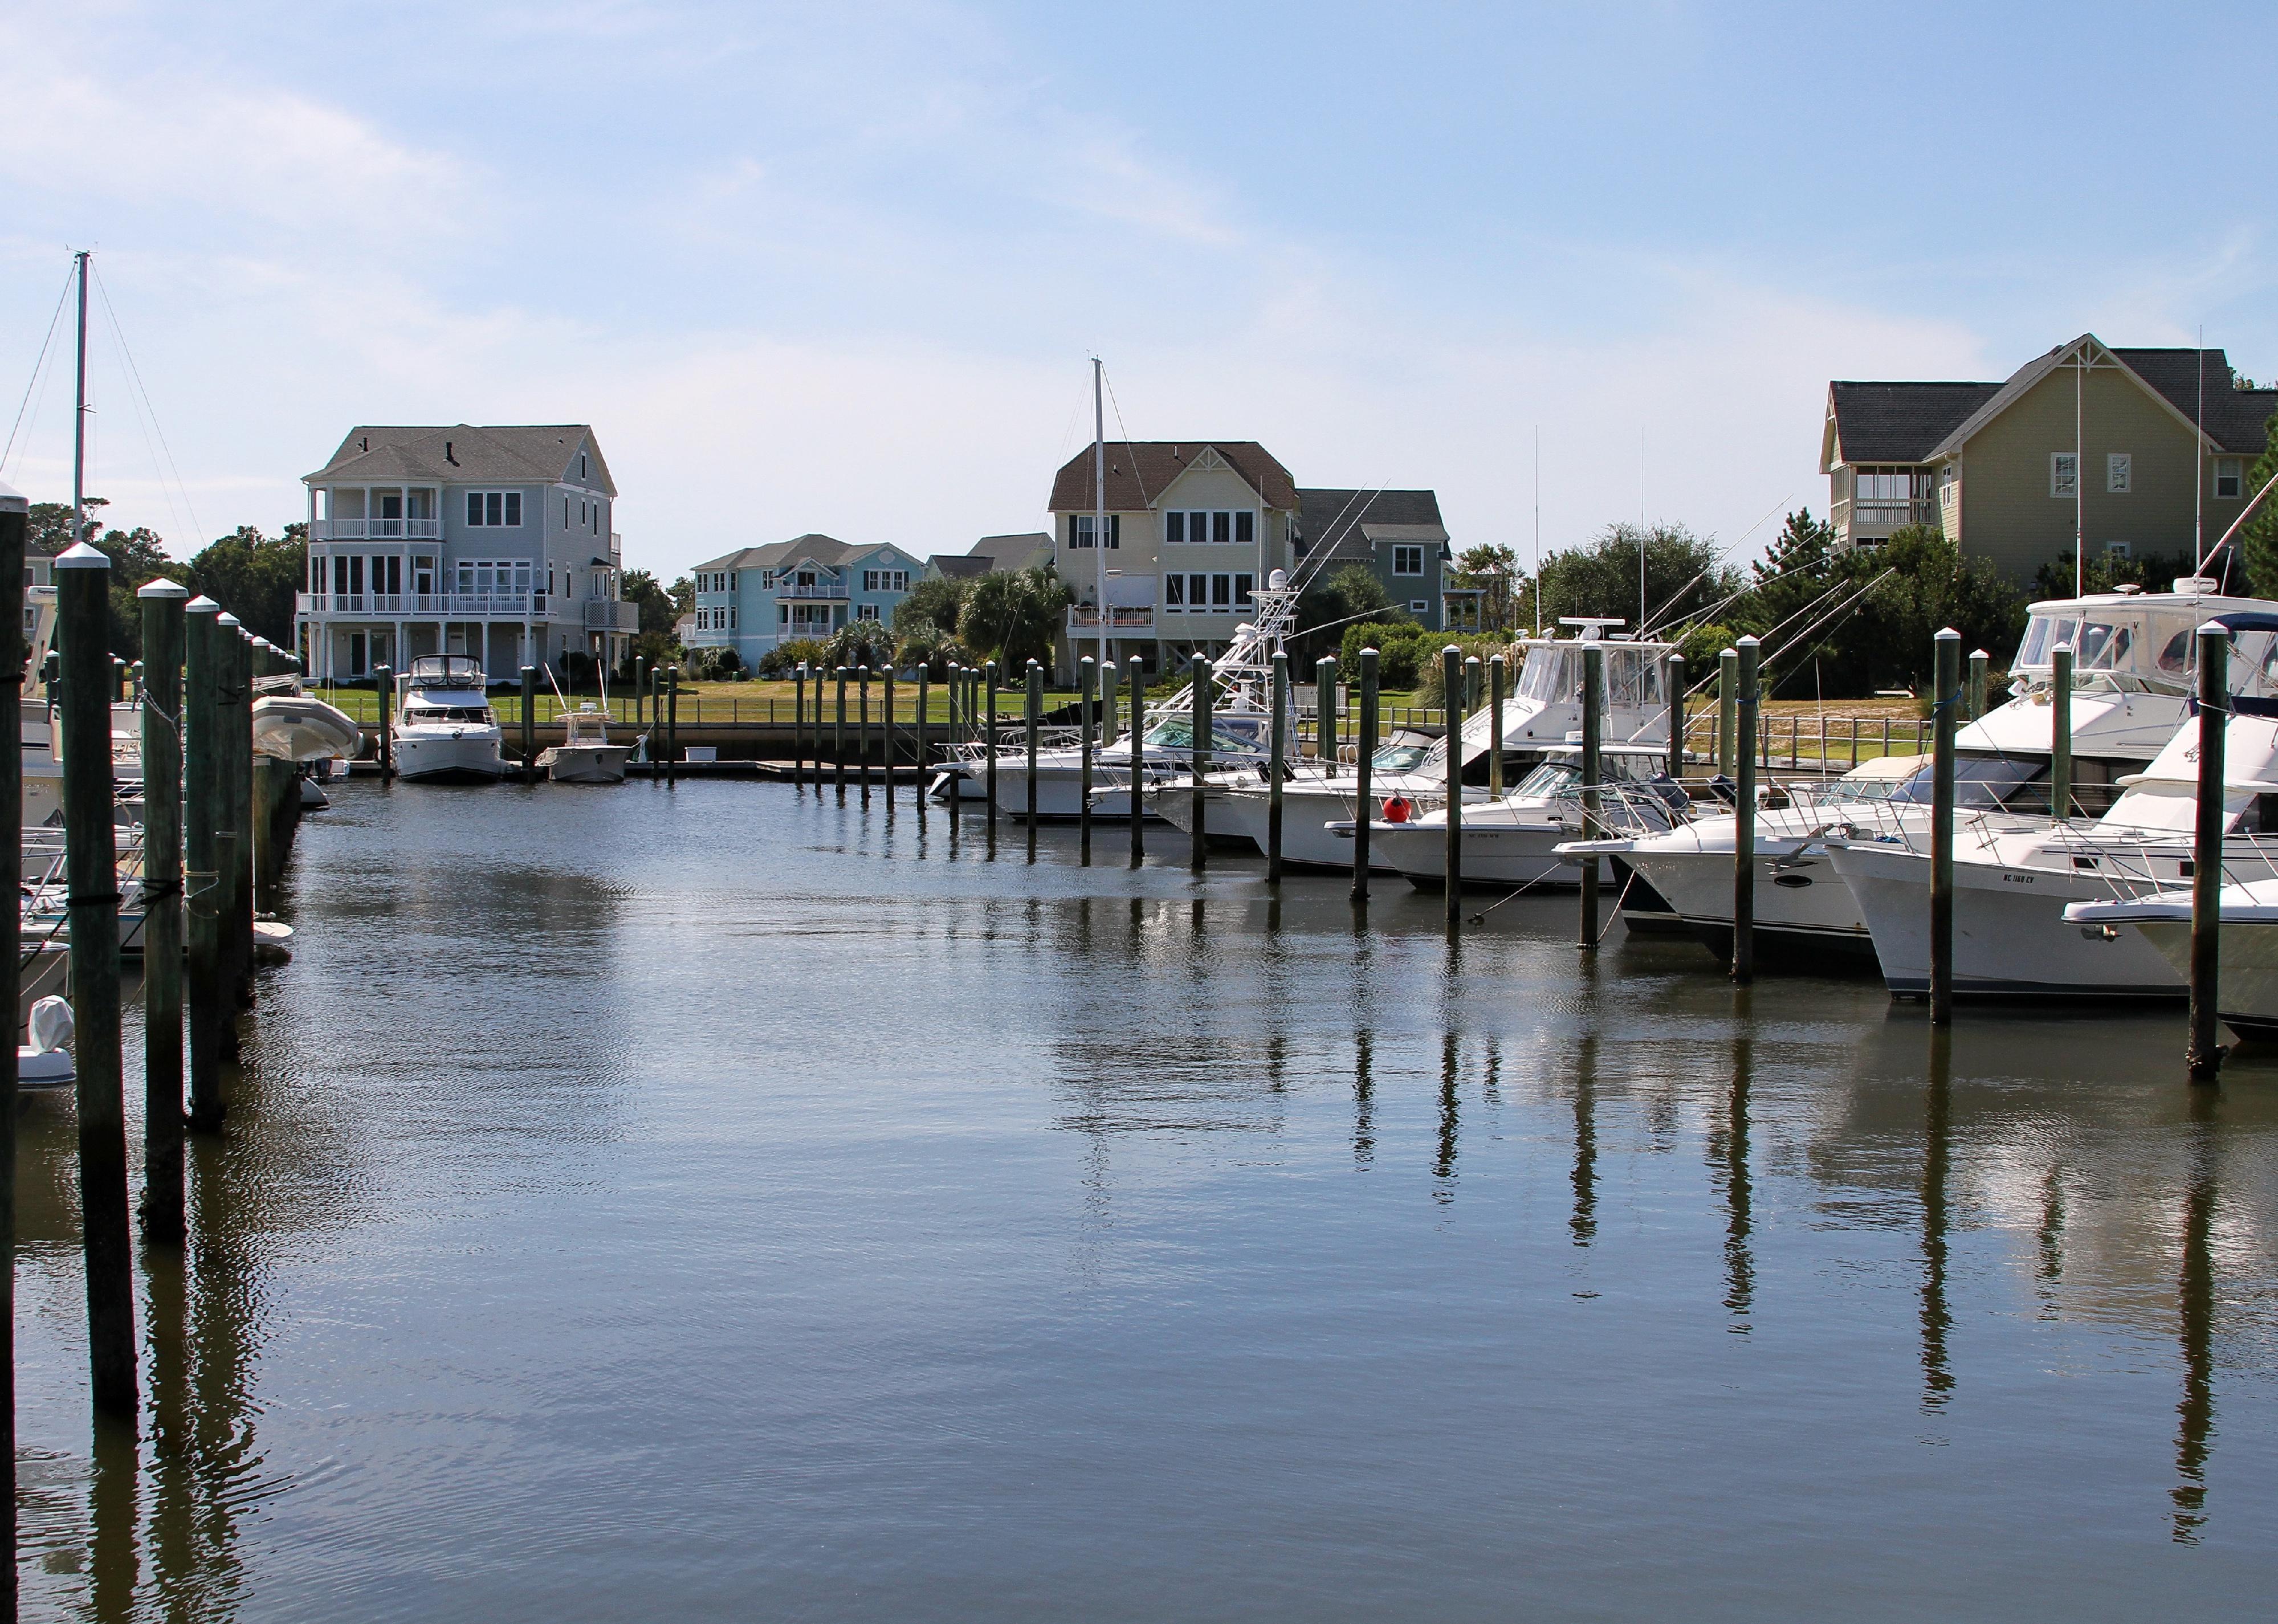 Waterfront homes by marina in summer.